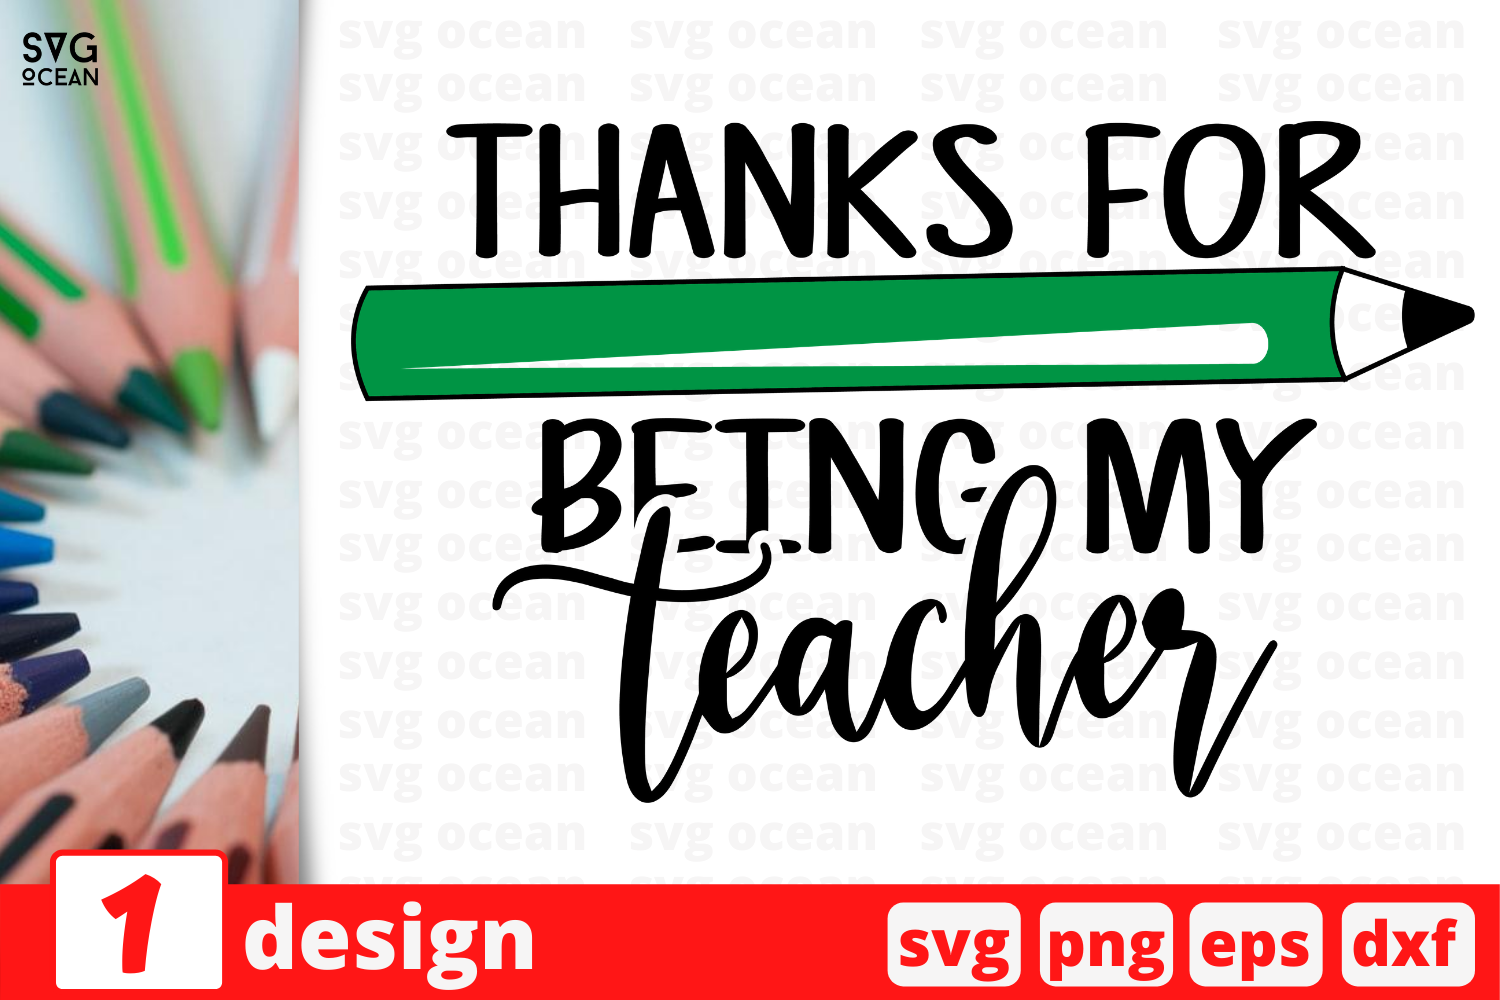 Download 1 THANKS FOR BEING MY TEACHER, Teacher quotes cricut svg By SvgOcean | TheHungryJPEG.com